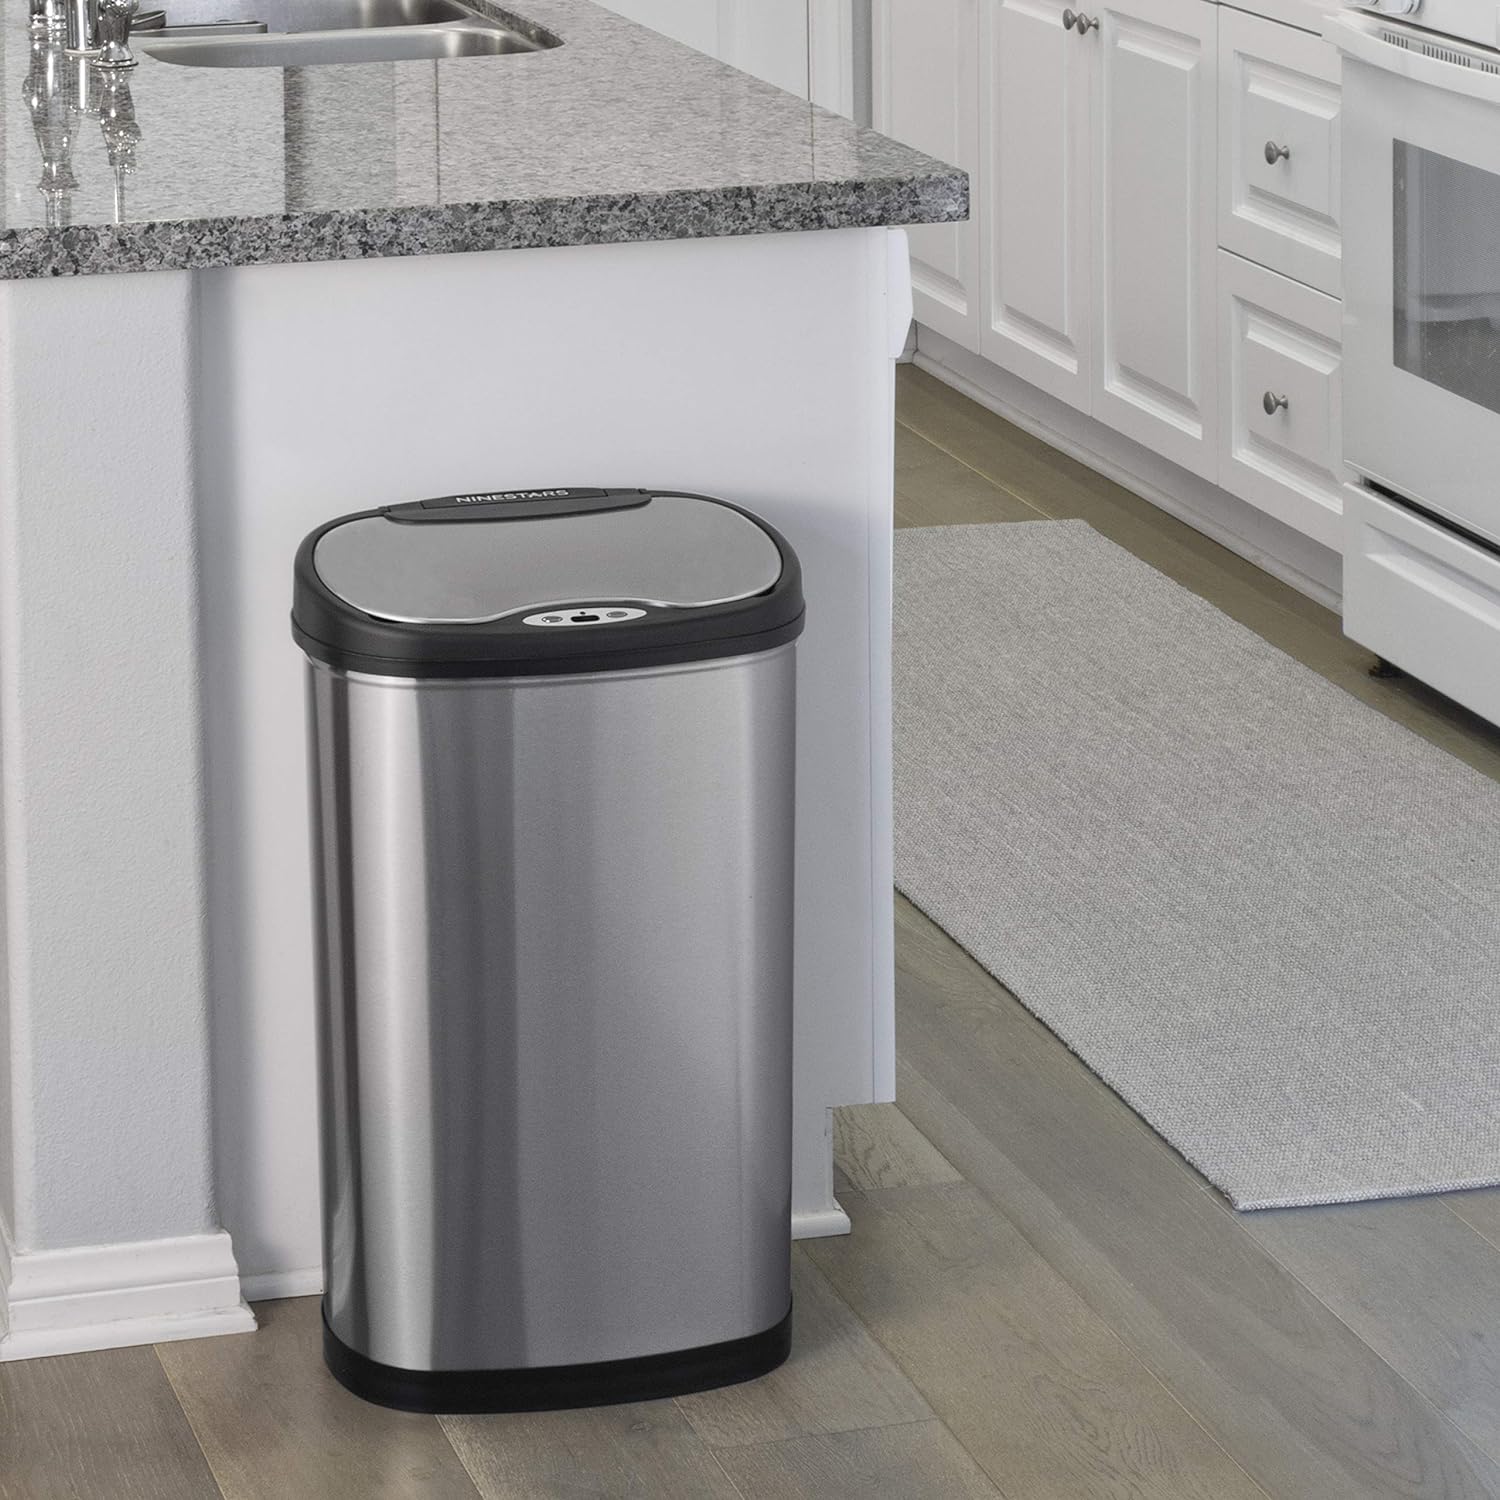 https://bigbigmart.com/wp-content/uploads/2023/10/NINESTARS-DZT-50-13-Automatic-Touchless-Motion-Sensor-Oval-Trash-Can-with-Black-Top-13-gallon-50-L-Stainless-Steel7.jpg